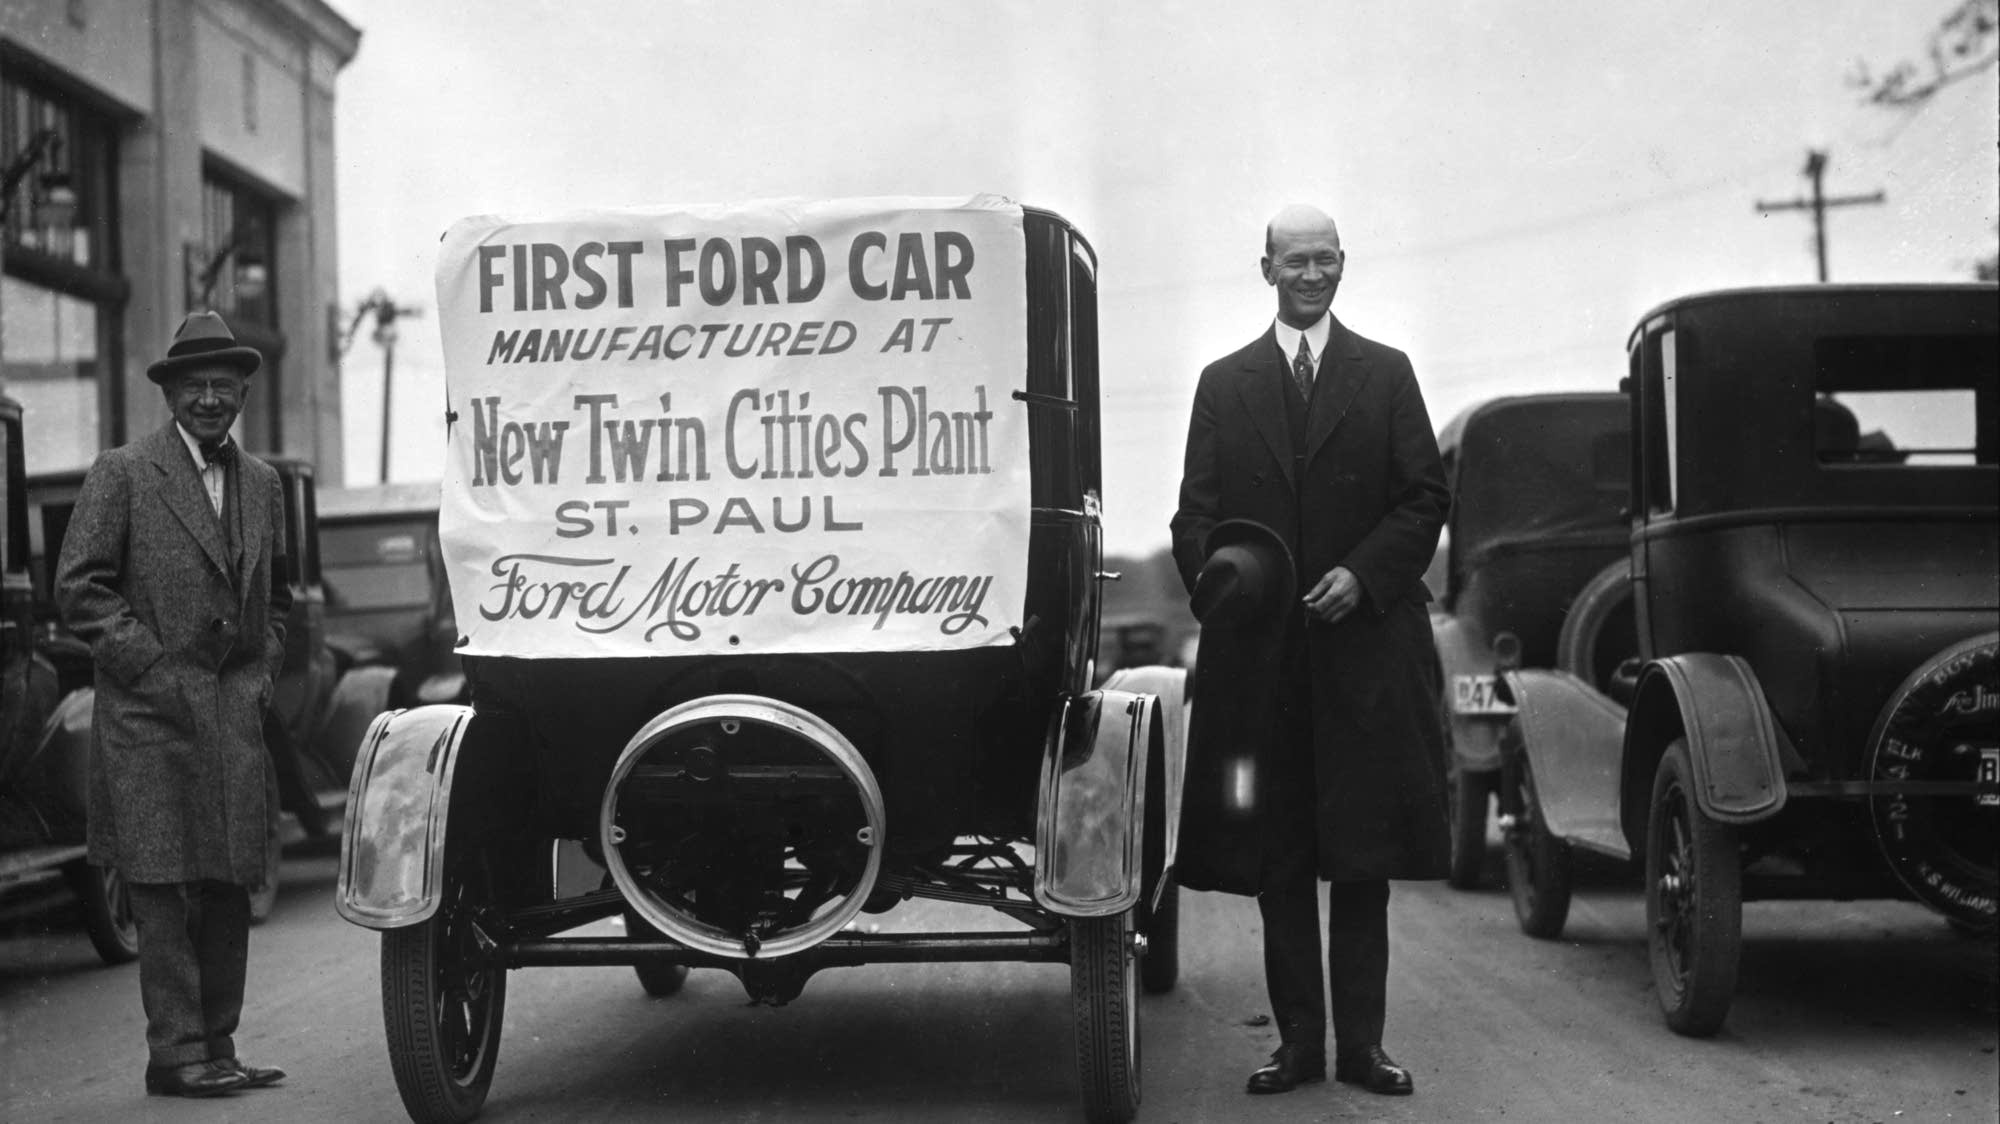 Henry Ford's influence in Minnesota, MPR News coverage, Economic impact, Automotive empire, 2000x1130 HD Desktop